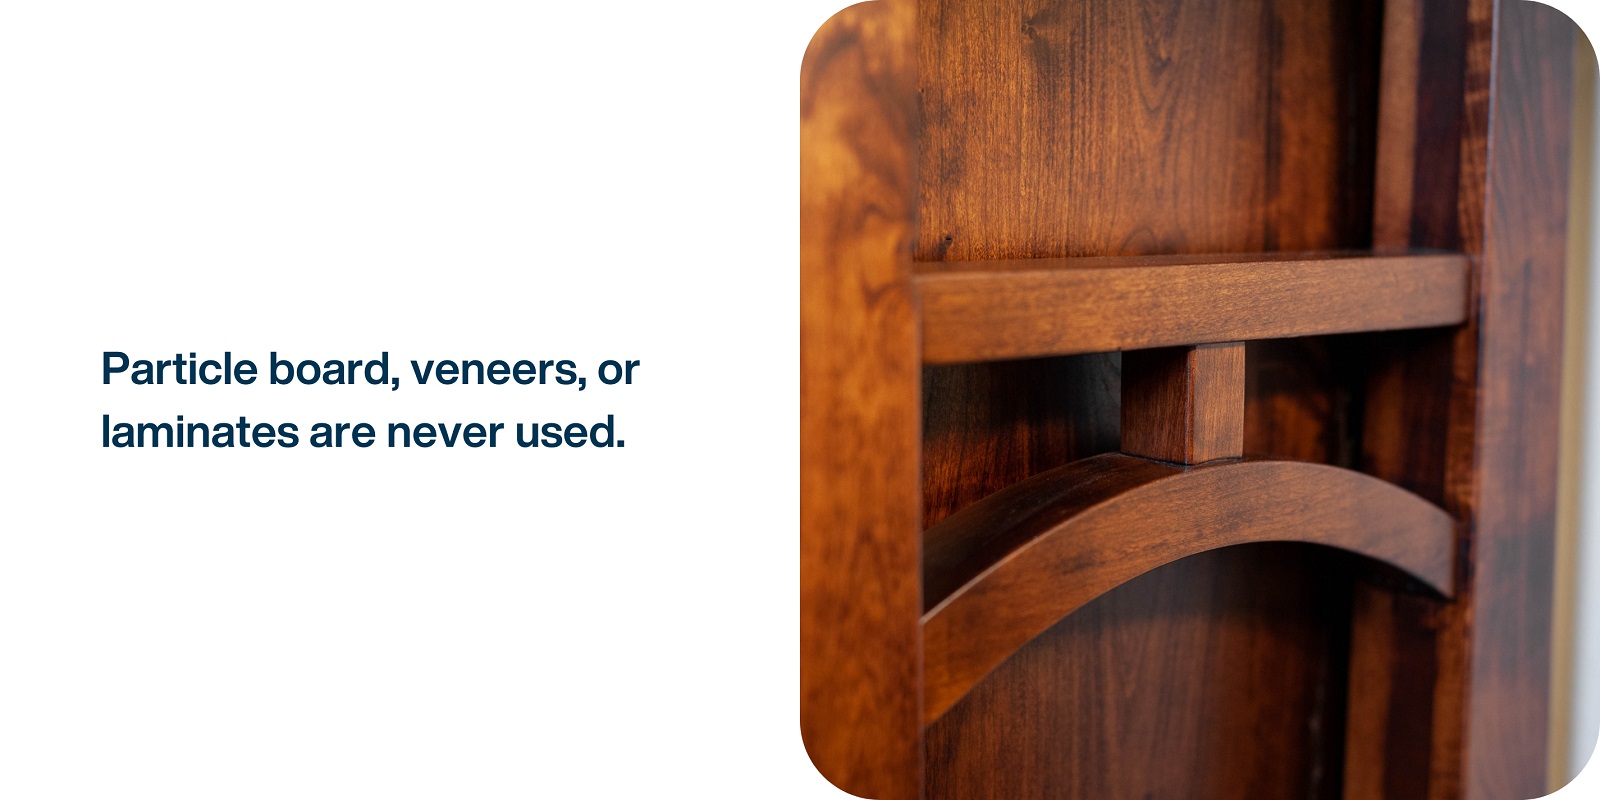 Particle board, veneers, or laminates are never used.